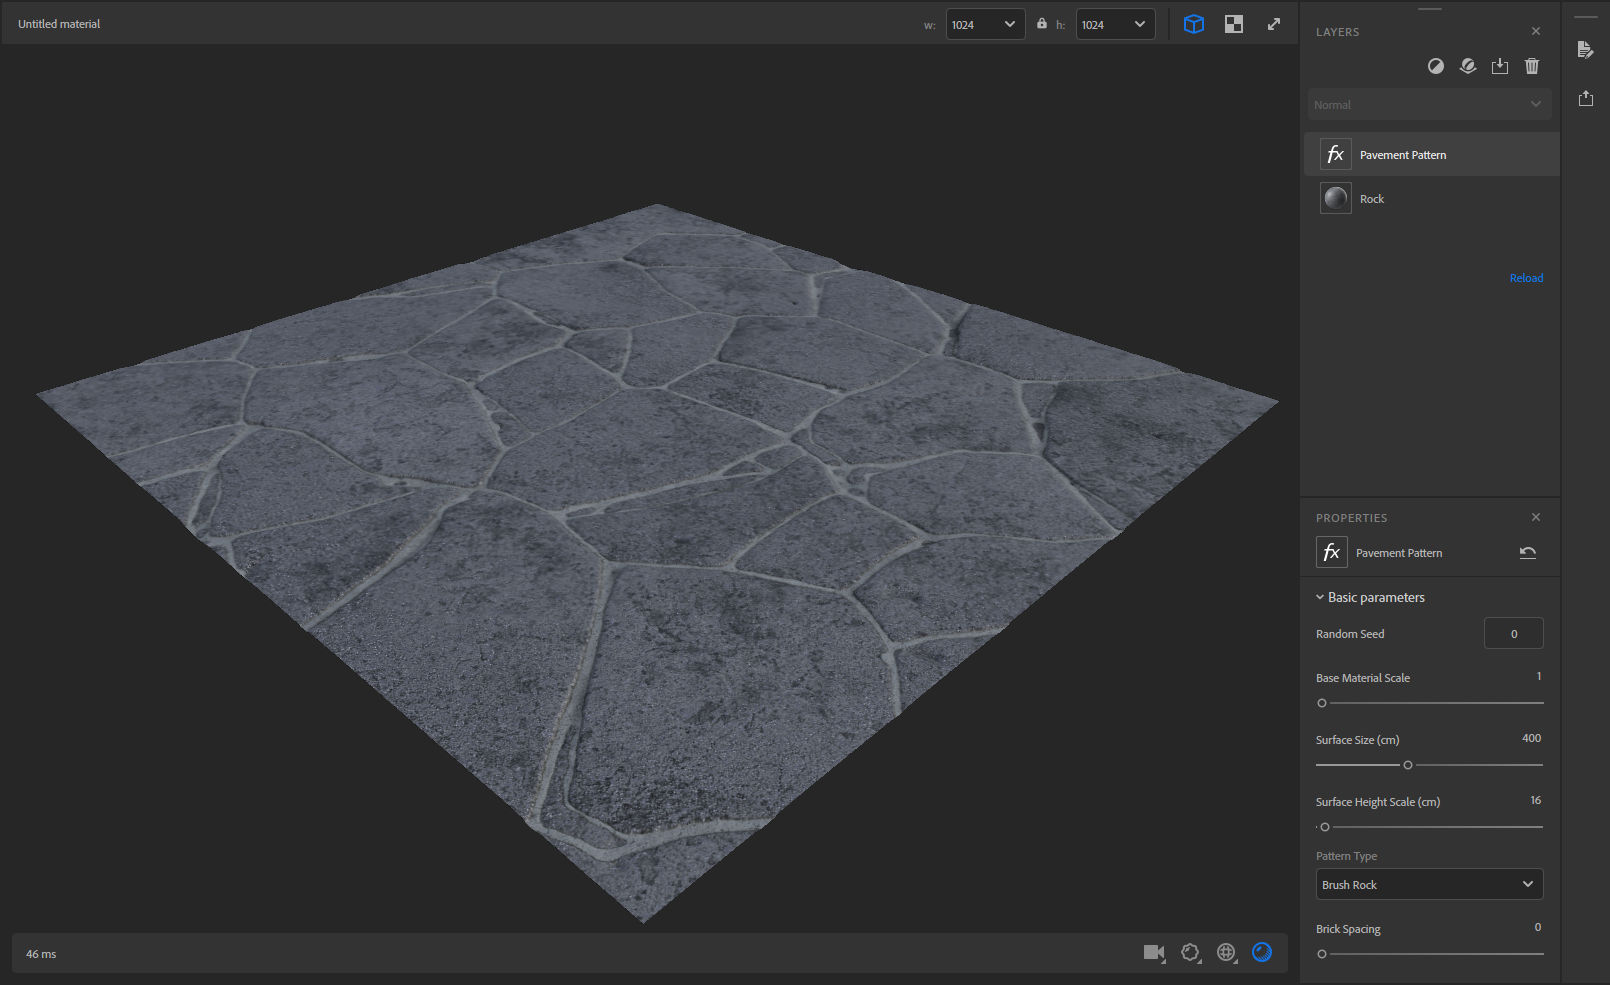 A screenshot of Sampler with the rock broken up by the pavement pattern filter.